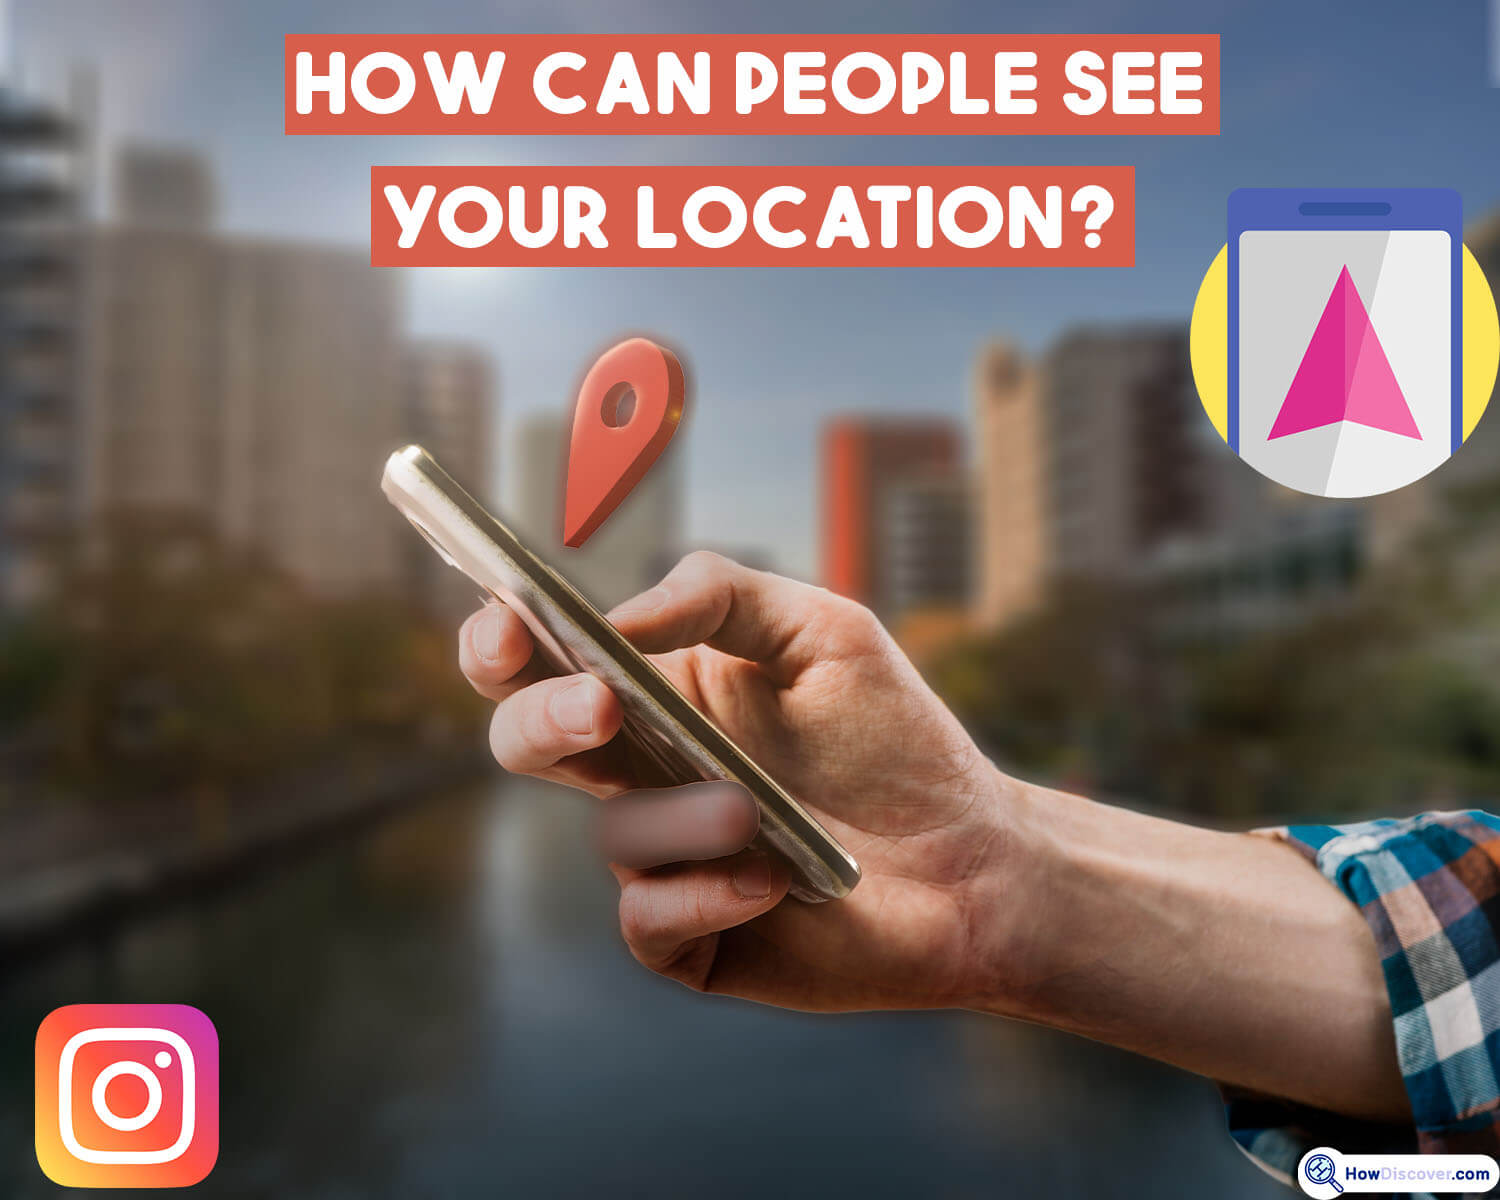 How can people see your location on Instagram?